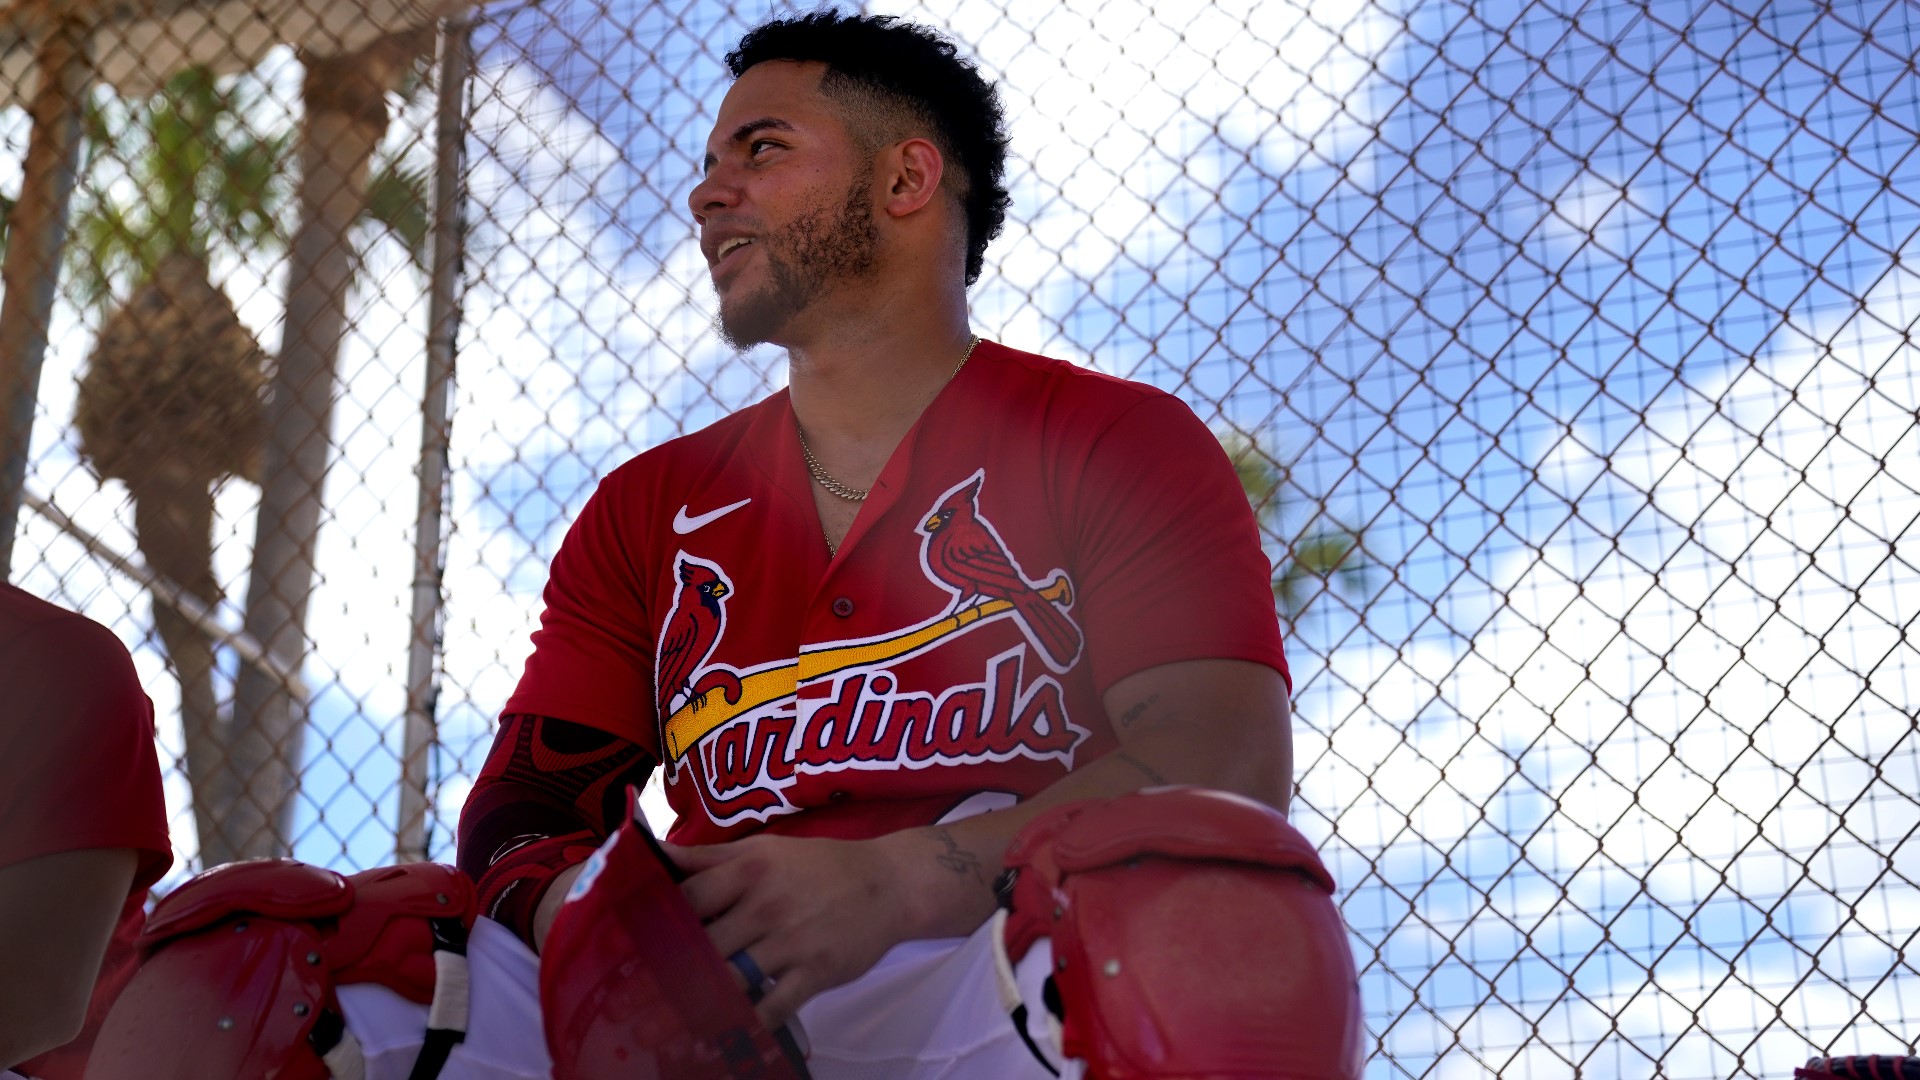 For the last nearly two decades, the Cardinals had a constant behind home plate. Now with Yadier Molina retired, it's Willson Contreras' turn.